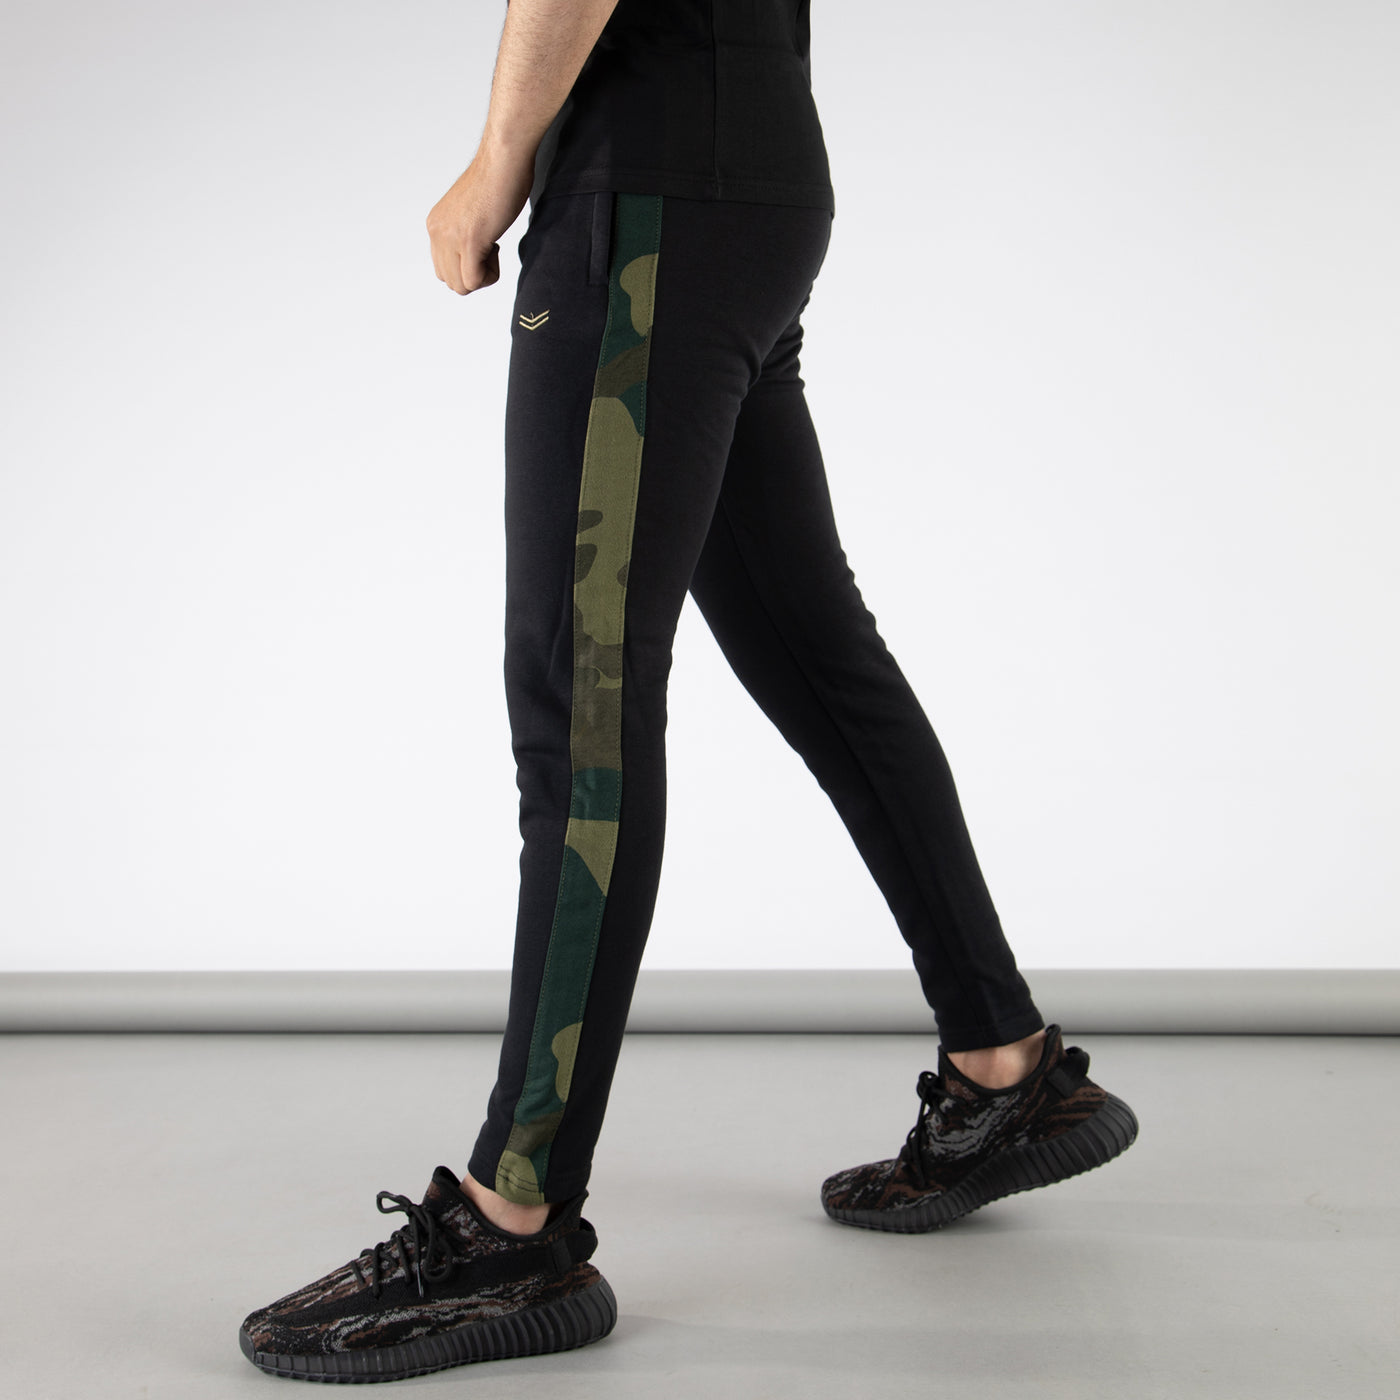 Black Bottoms with Green Camo Panels